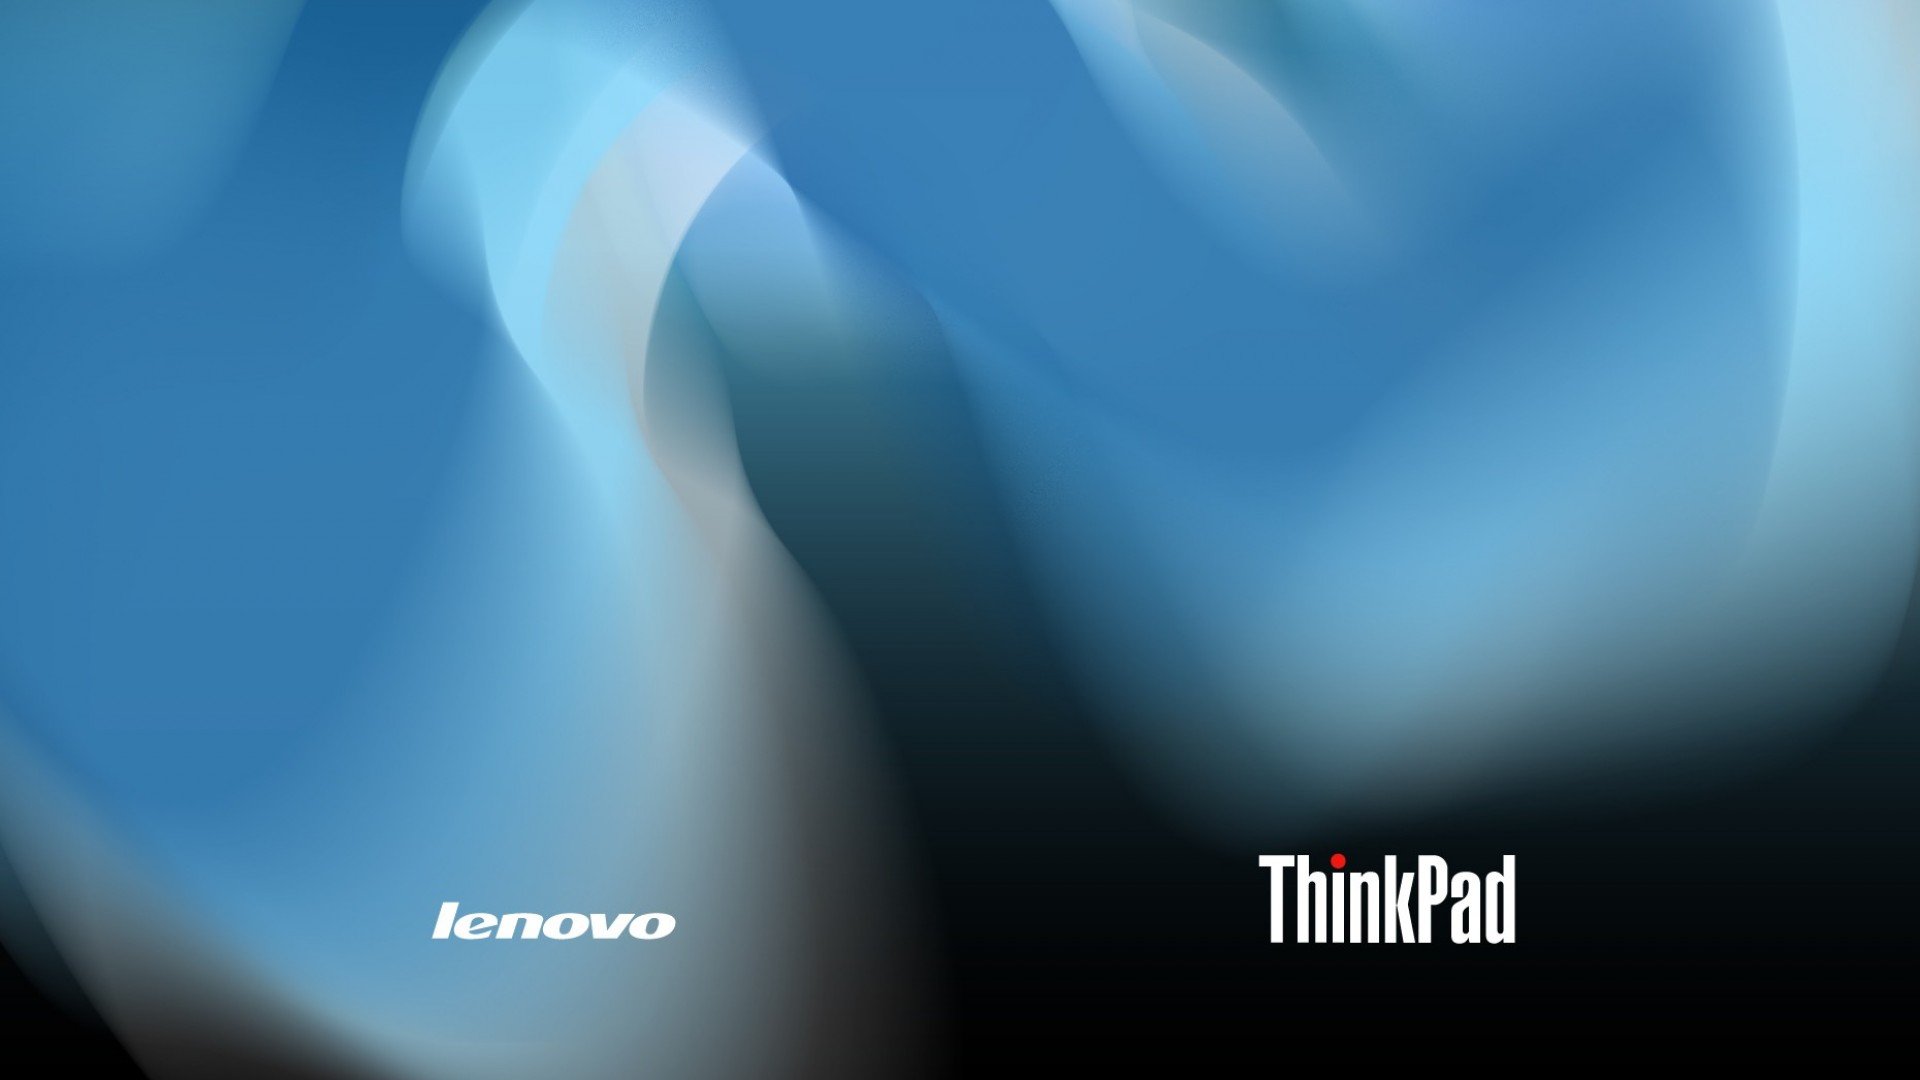 lenovo wallpapers hd,blue,joint,sky,atmosphere,font